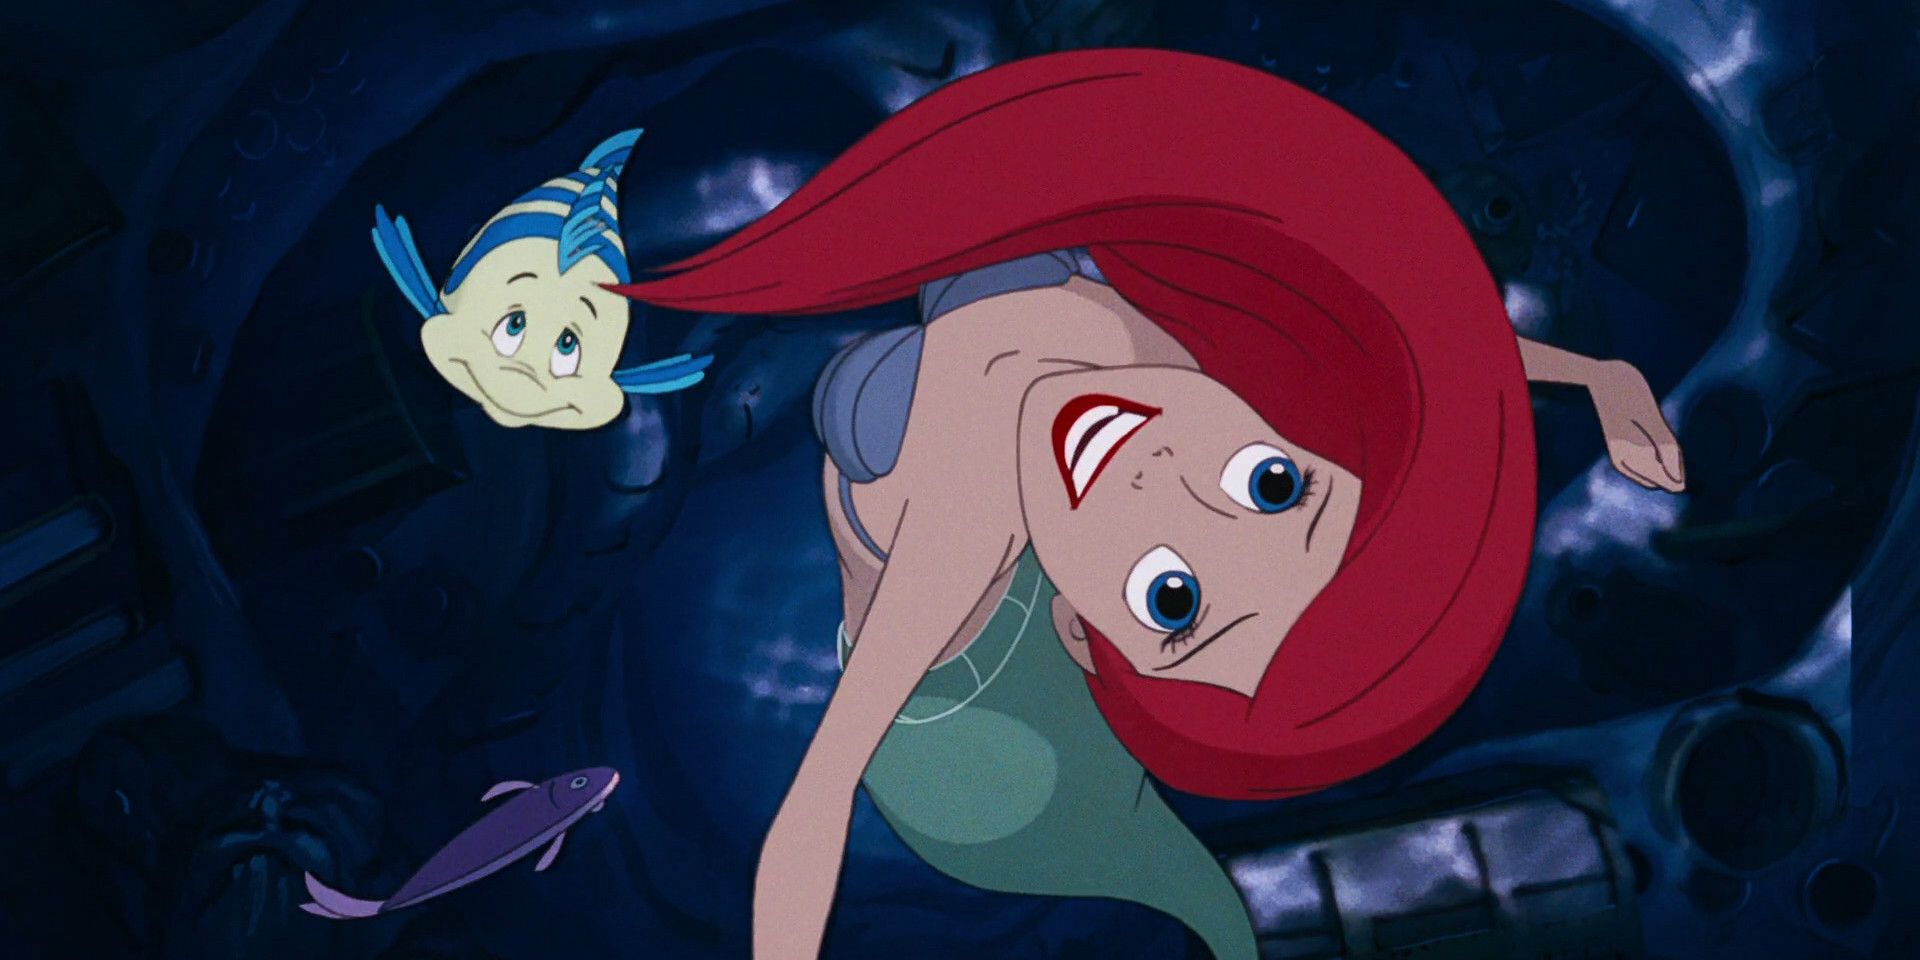 Flounder swimming behind Ariel in the grotto when she sings "Part of Your World" in the animated The Little Mermaid